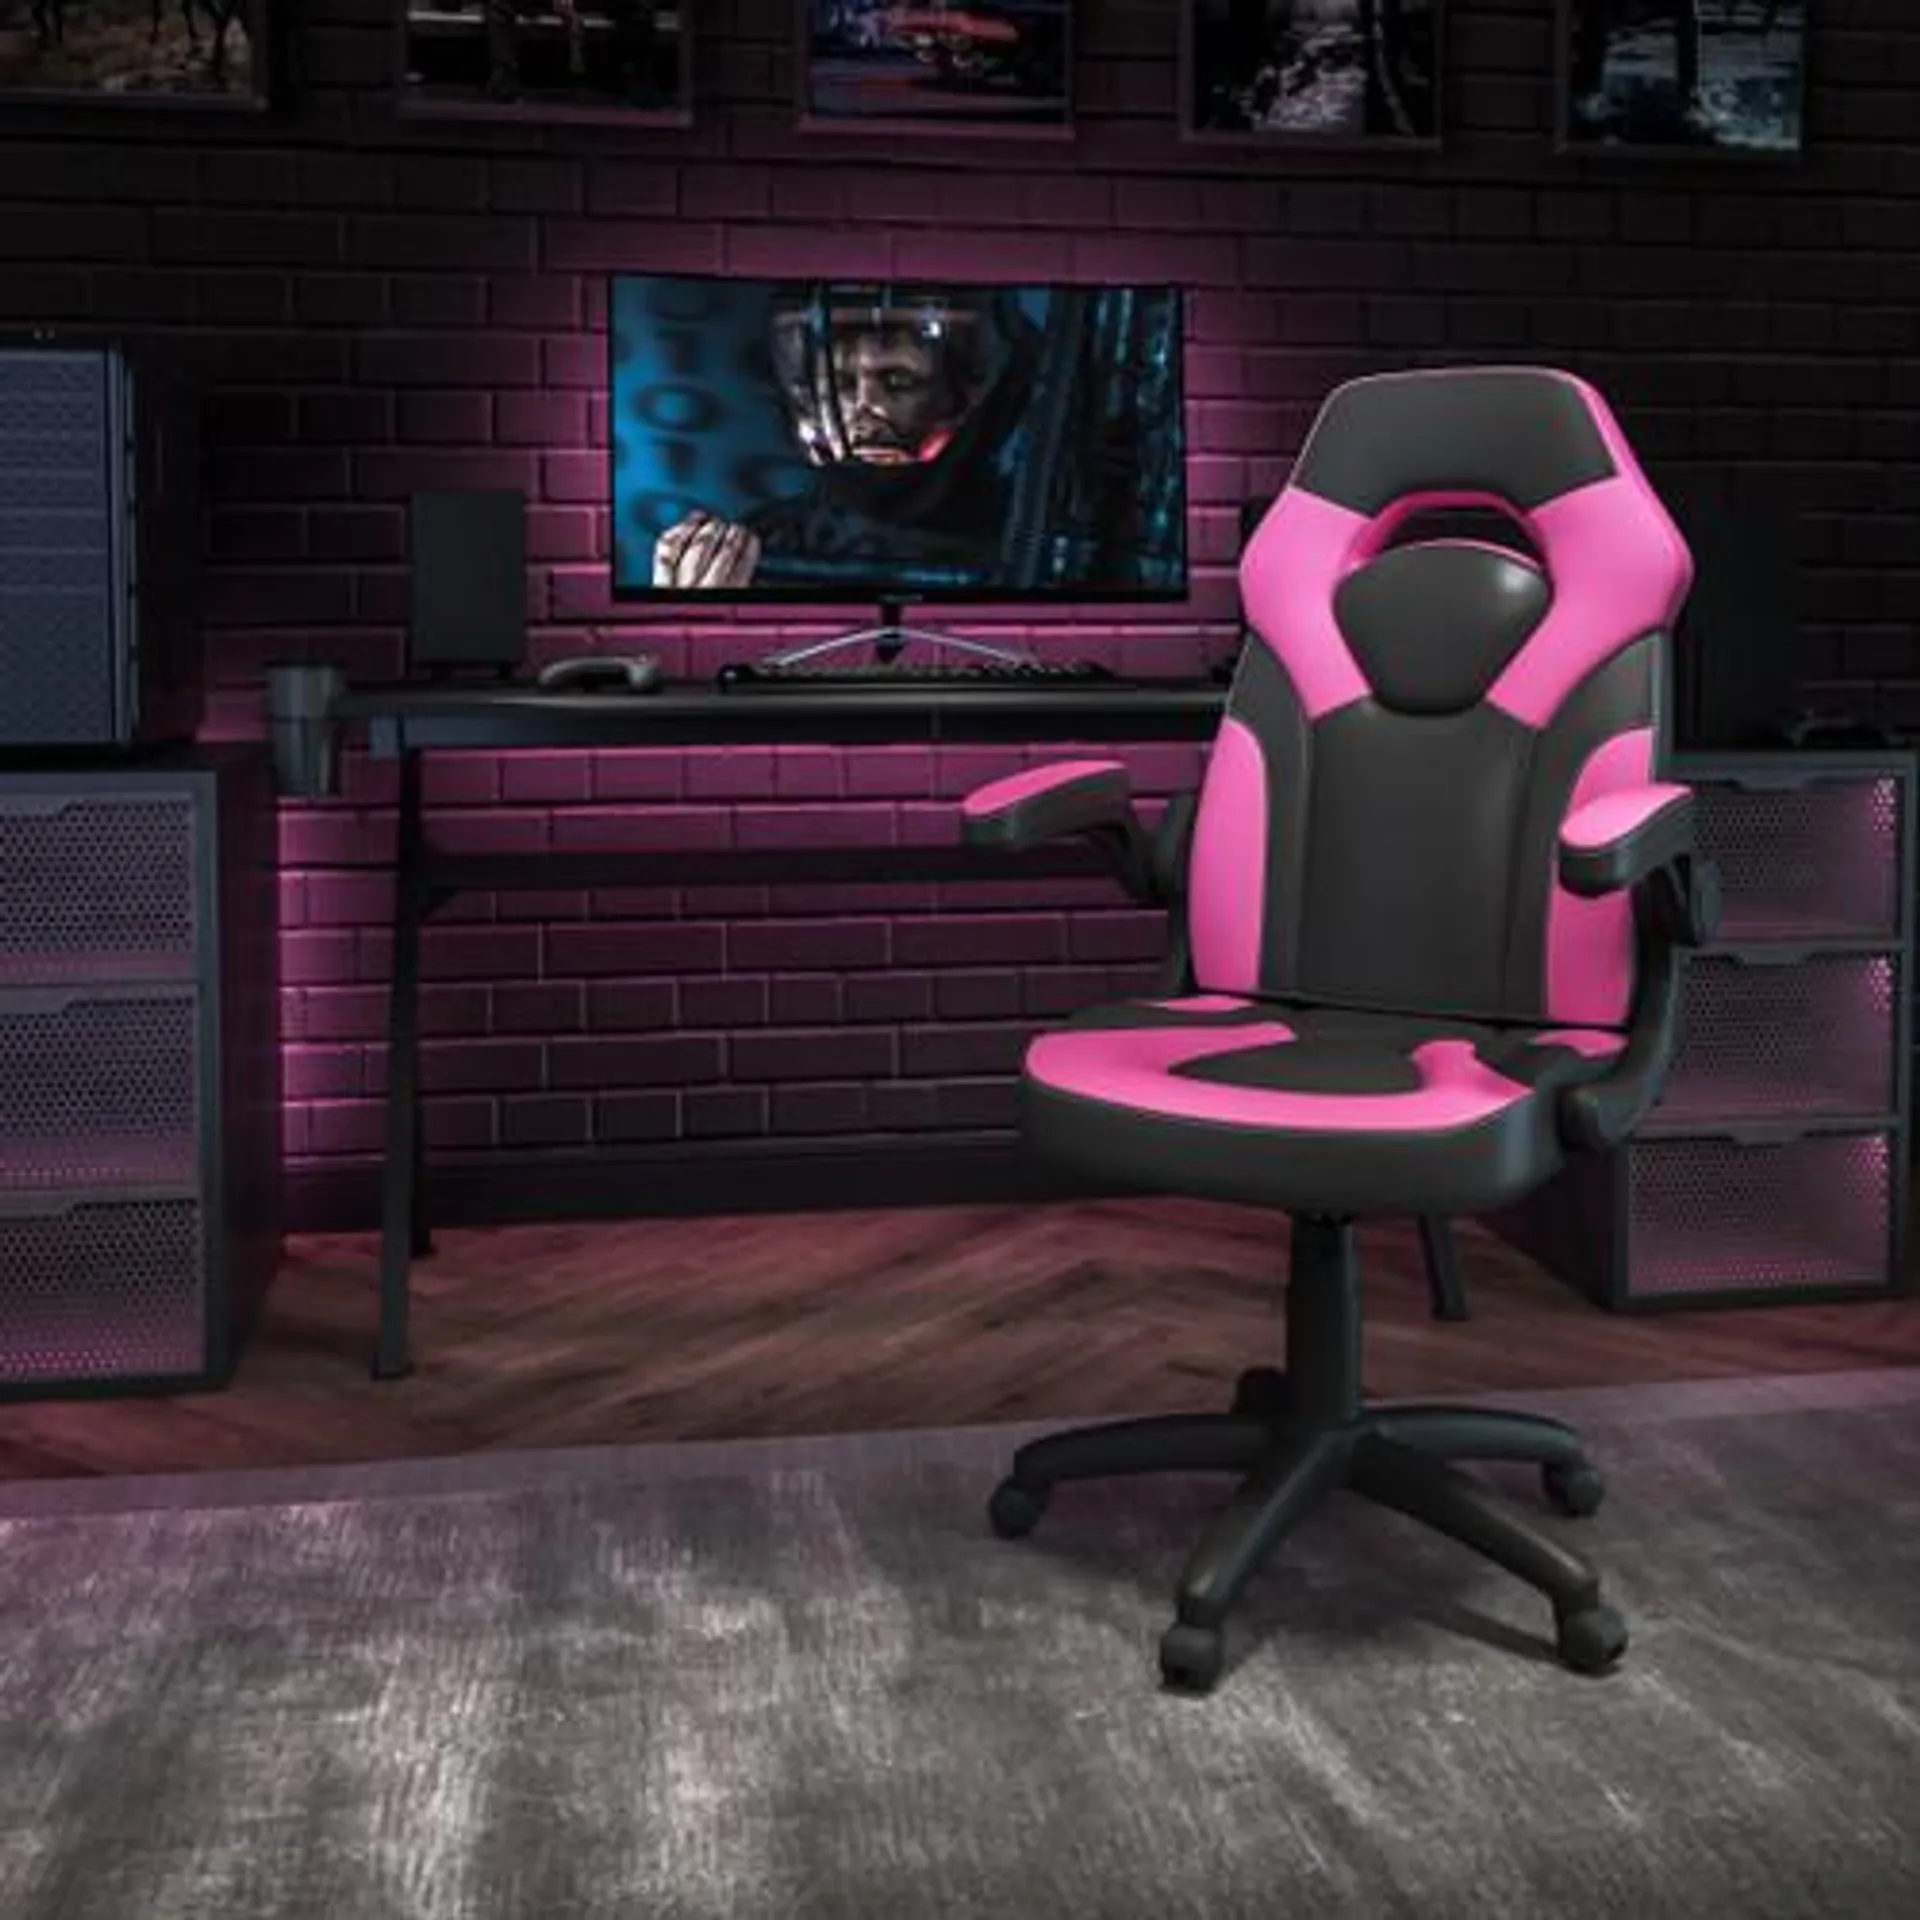 X10 Gaming Chair Racing Ergonomic Computer PC Adjustable Swivel Chair with Flip-up Arms, Pink/Black LeatherSoft